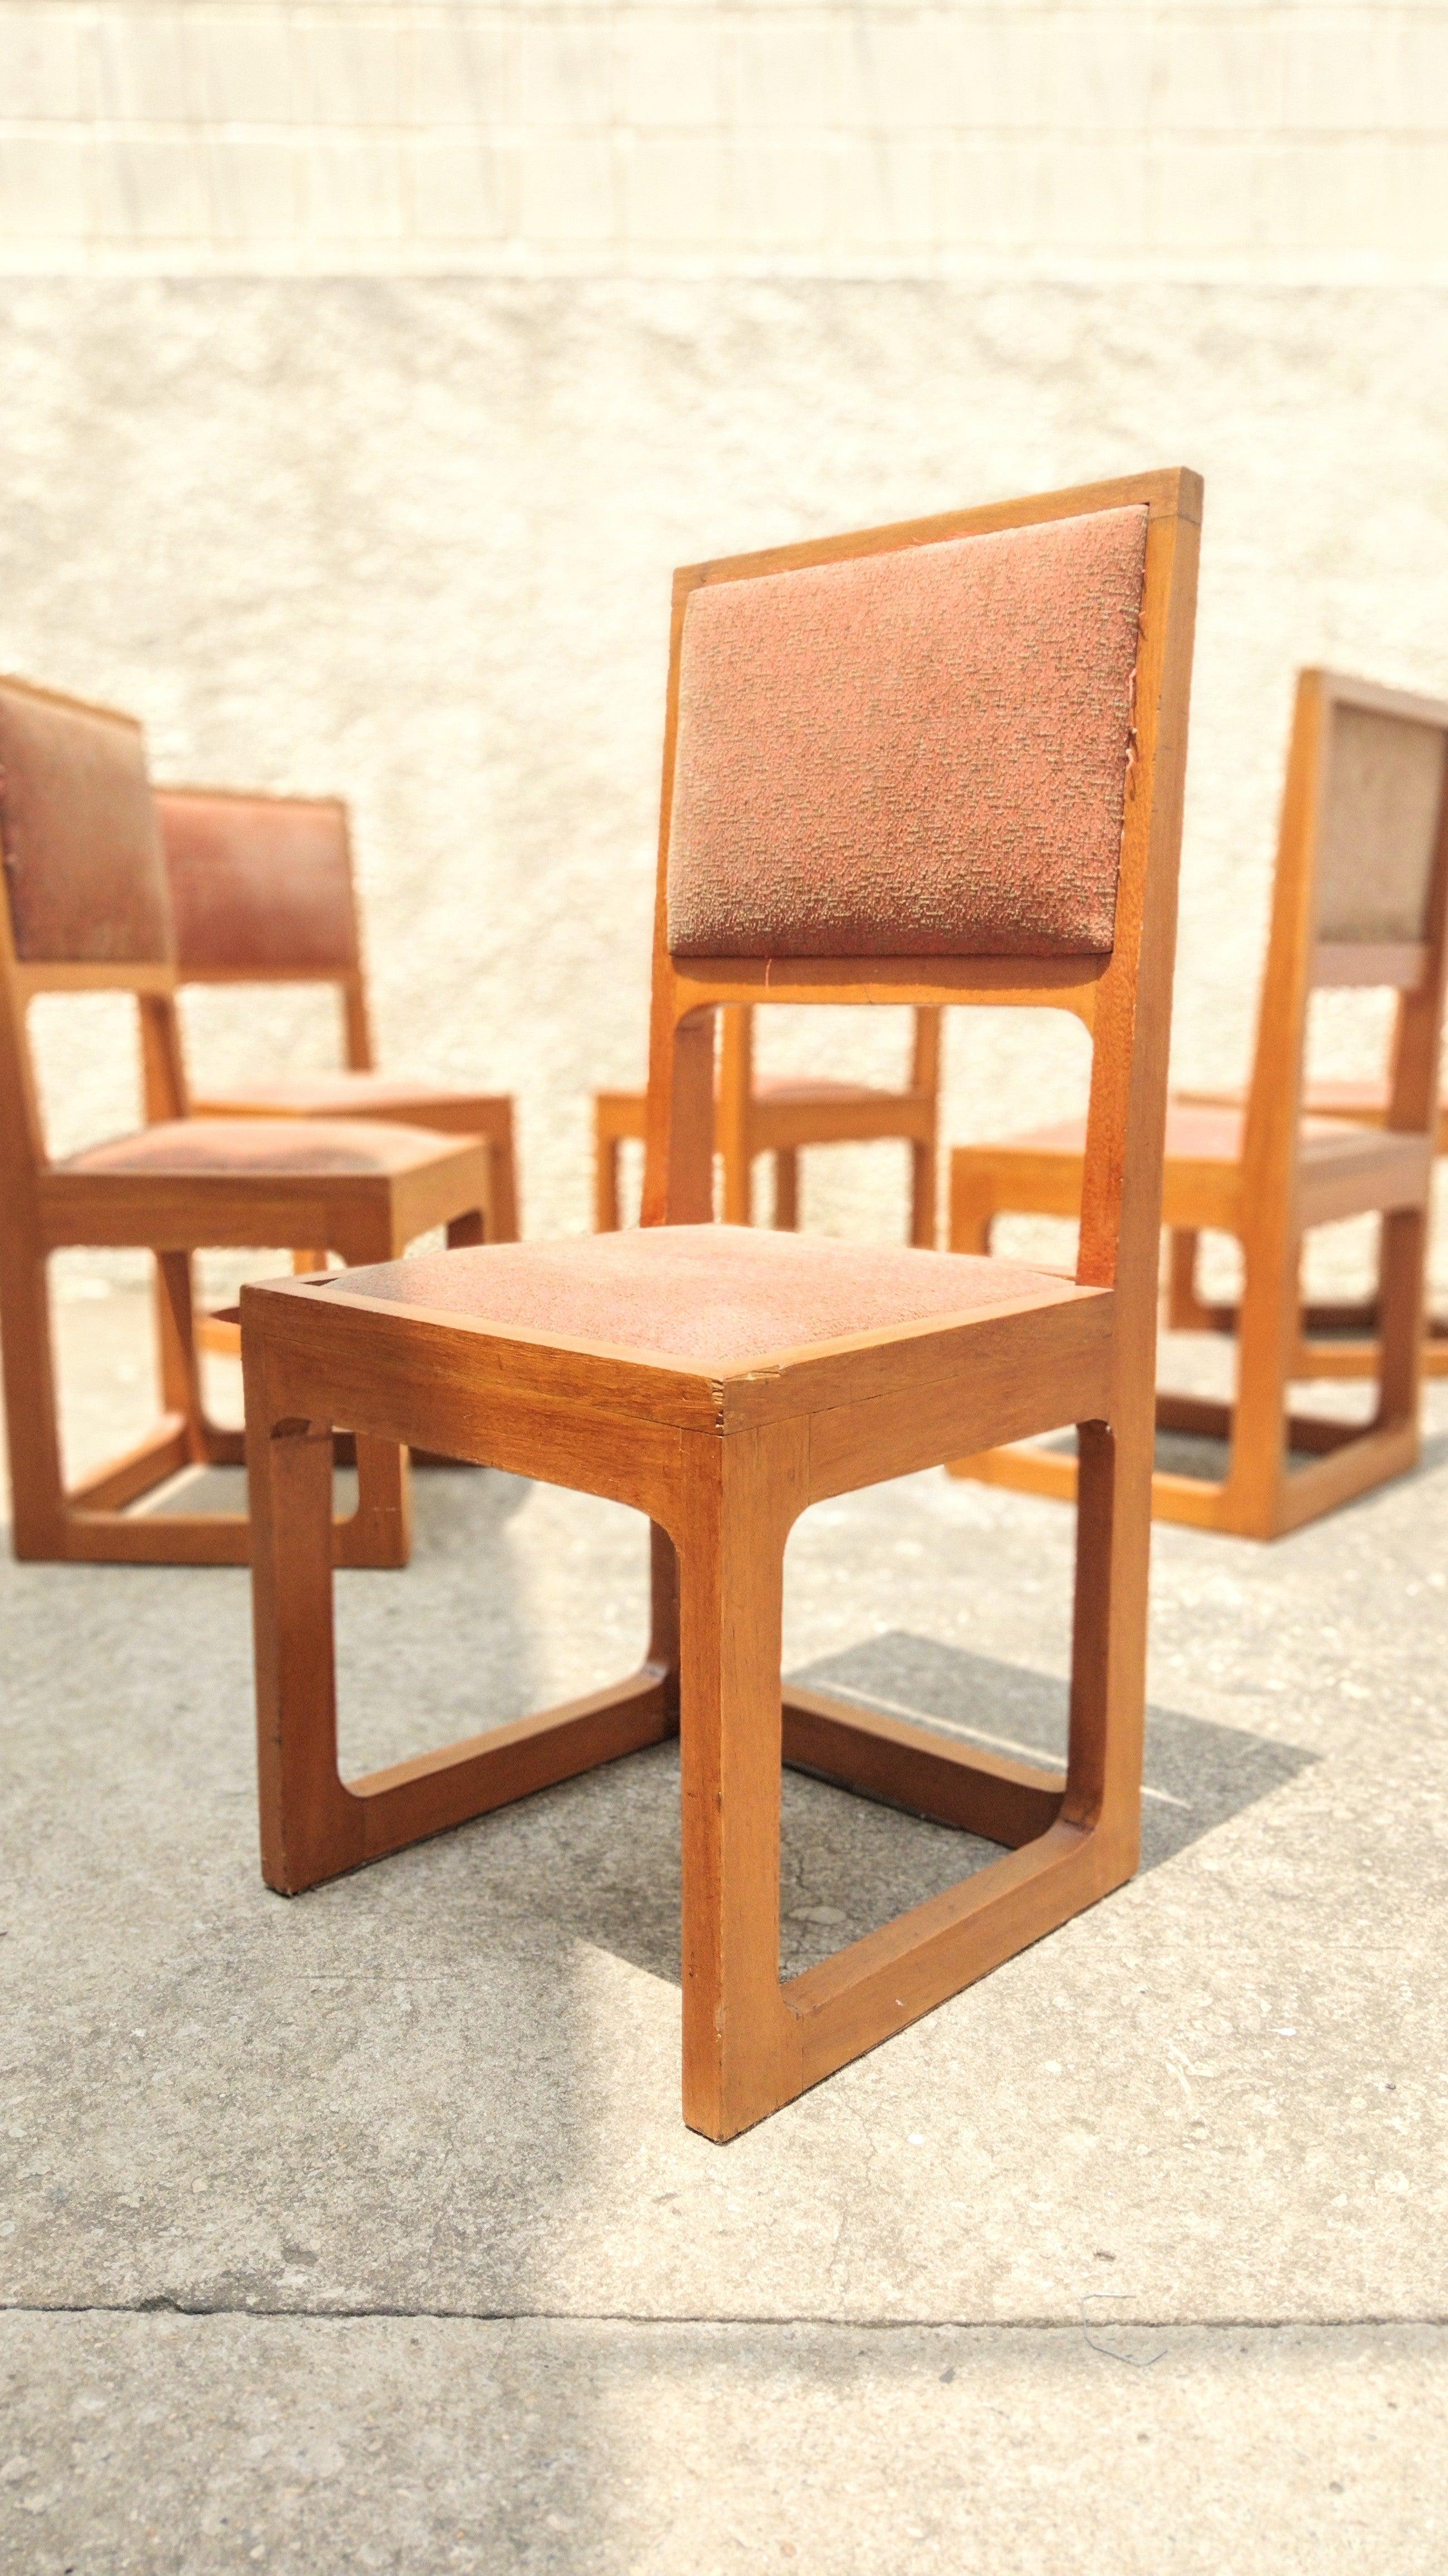 Brazilian Mid-Century Modern set with 6 chairs with cherry wood. Seat/backrest upholstery texturized with comfortable cushions. Firm and resistant structures. Overall great condition with only minor age appropriate wear.

Approximate